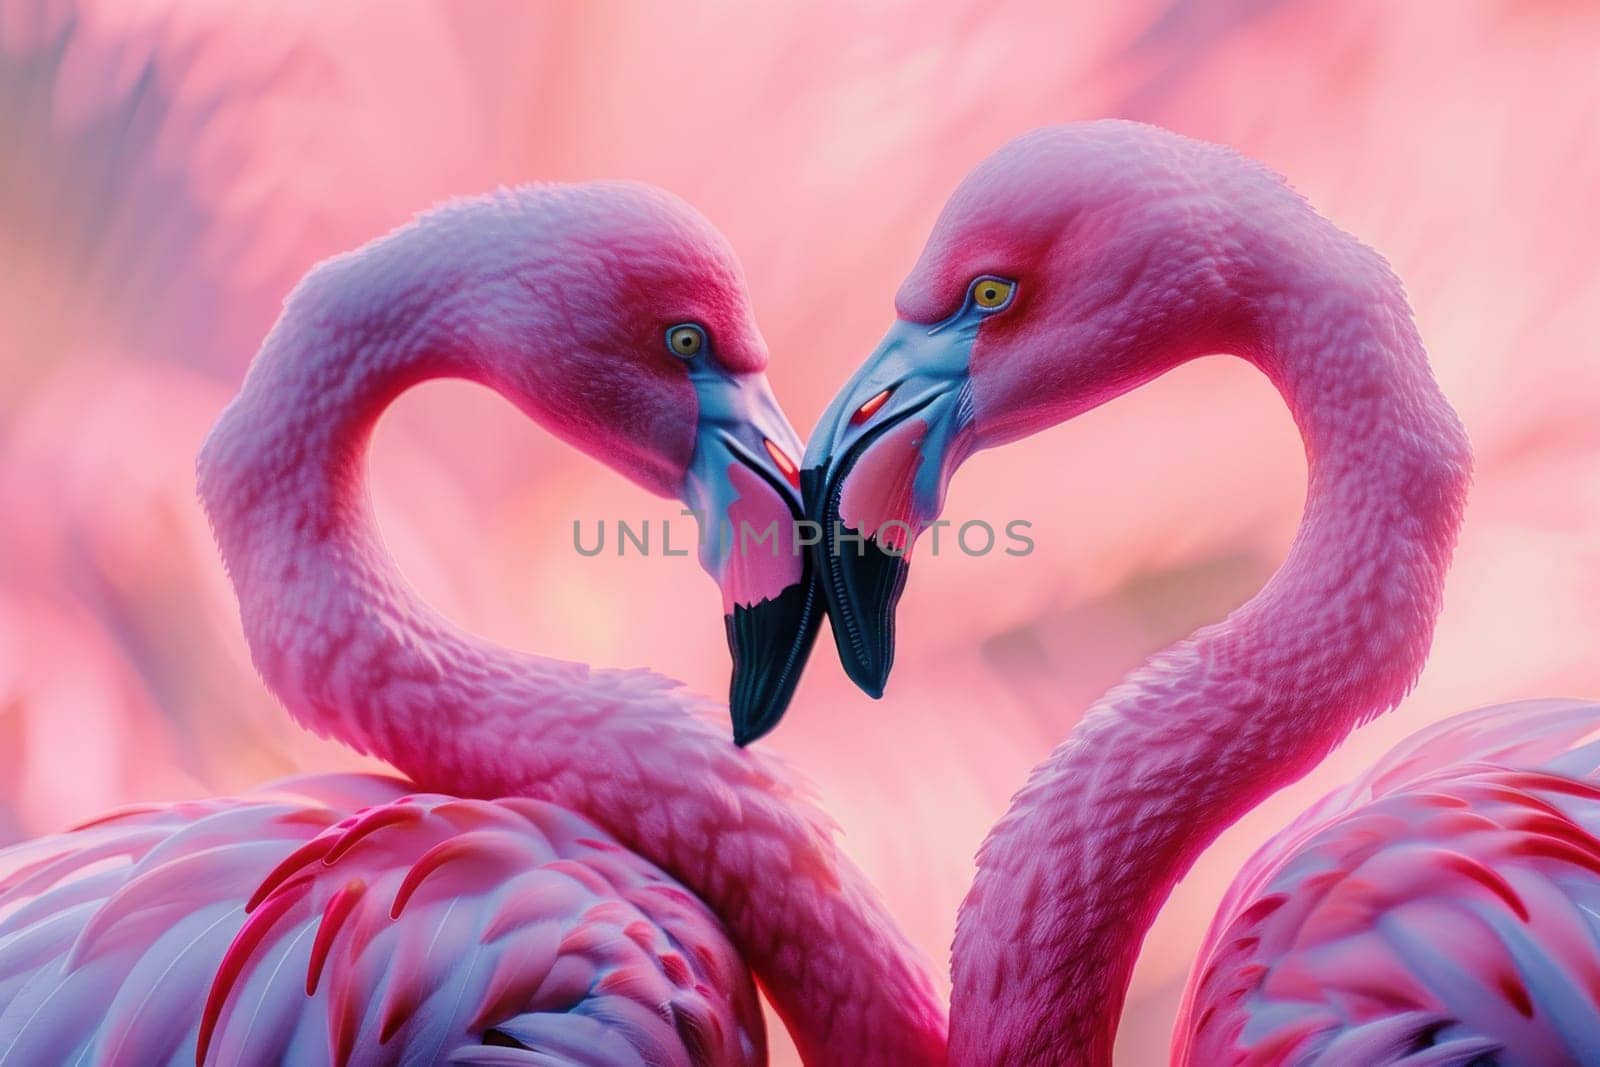 Romantic flamingos making heart shape in front of pink background for love, nature, and art themes